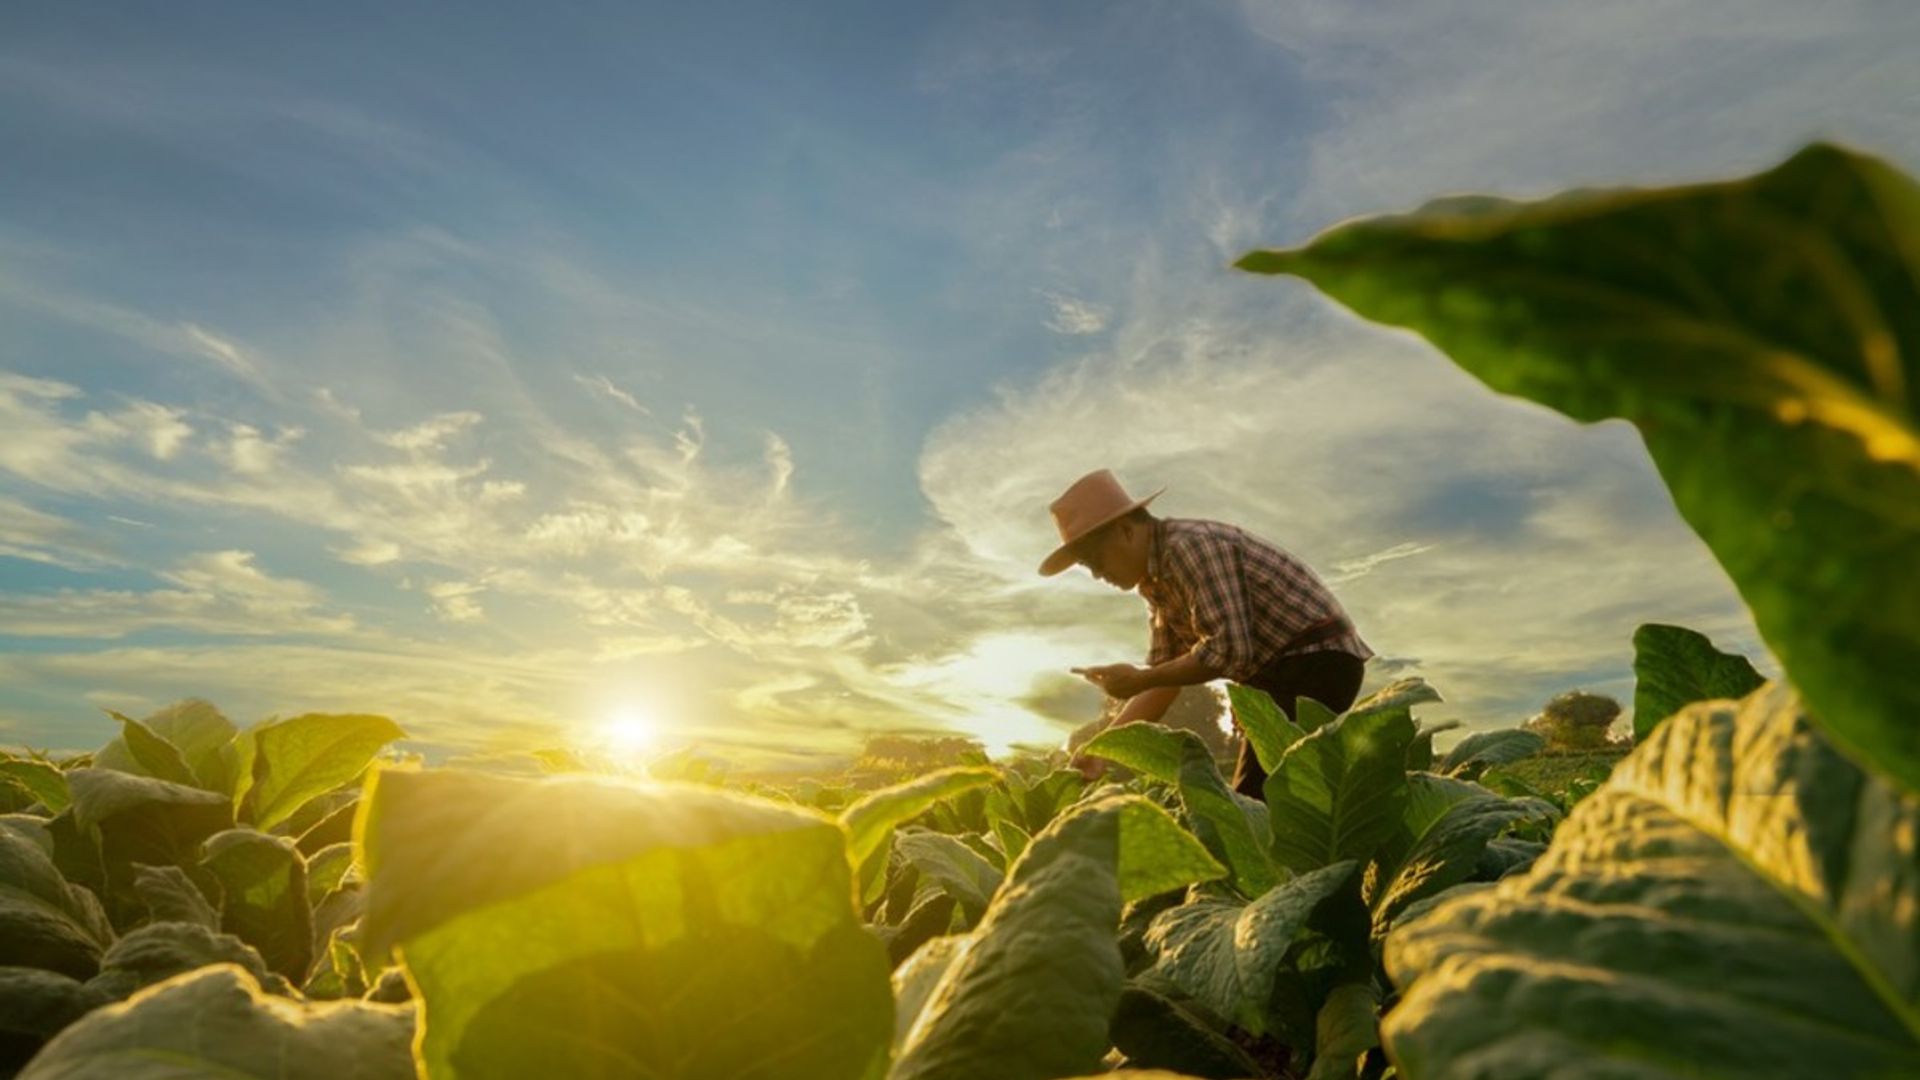 Image of a producer working in a field at sunrise